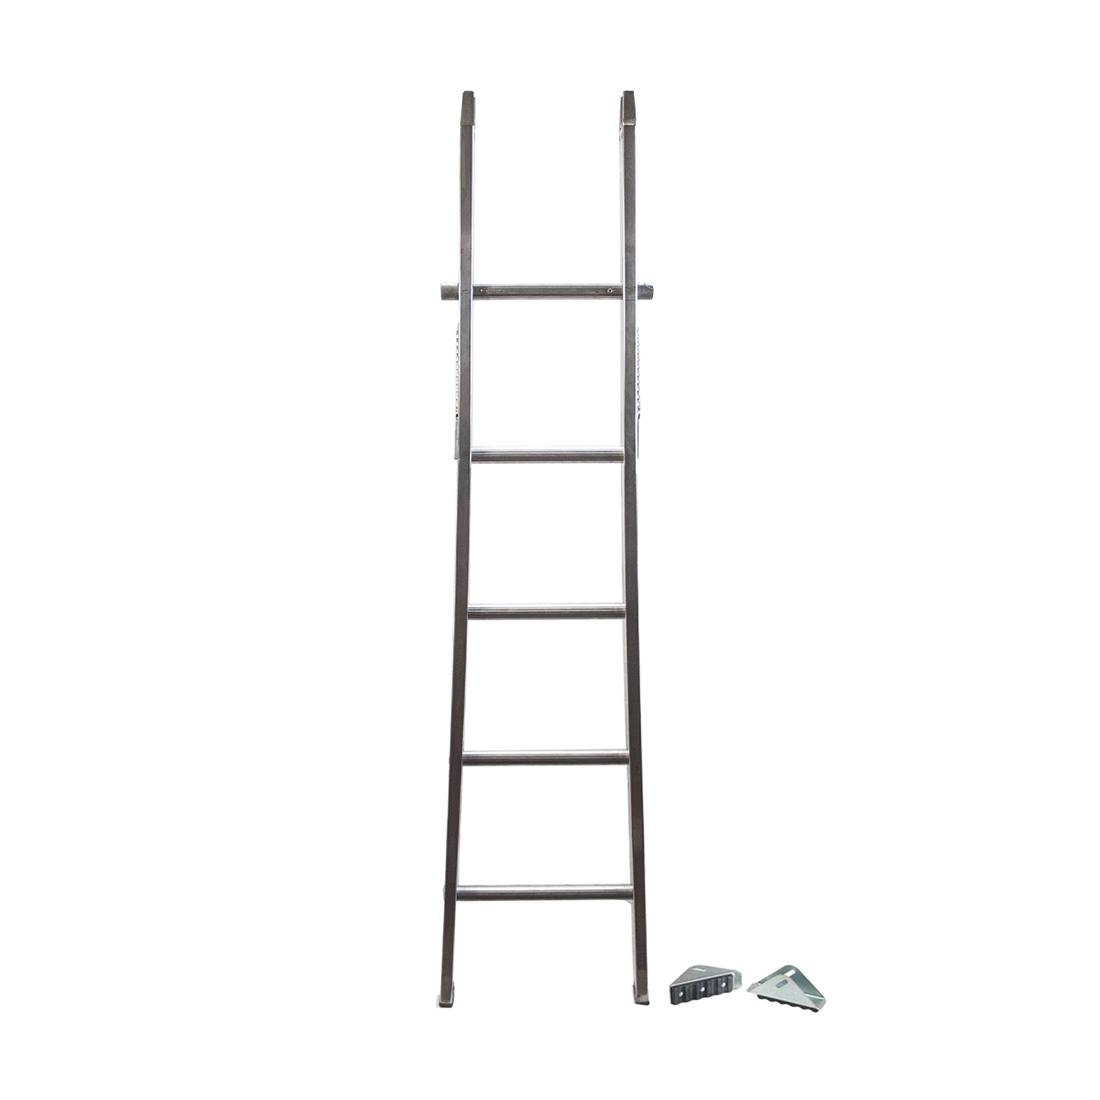 Metallic Ladder Base with Shoes - 6 Foot